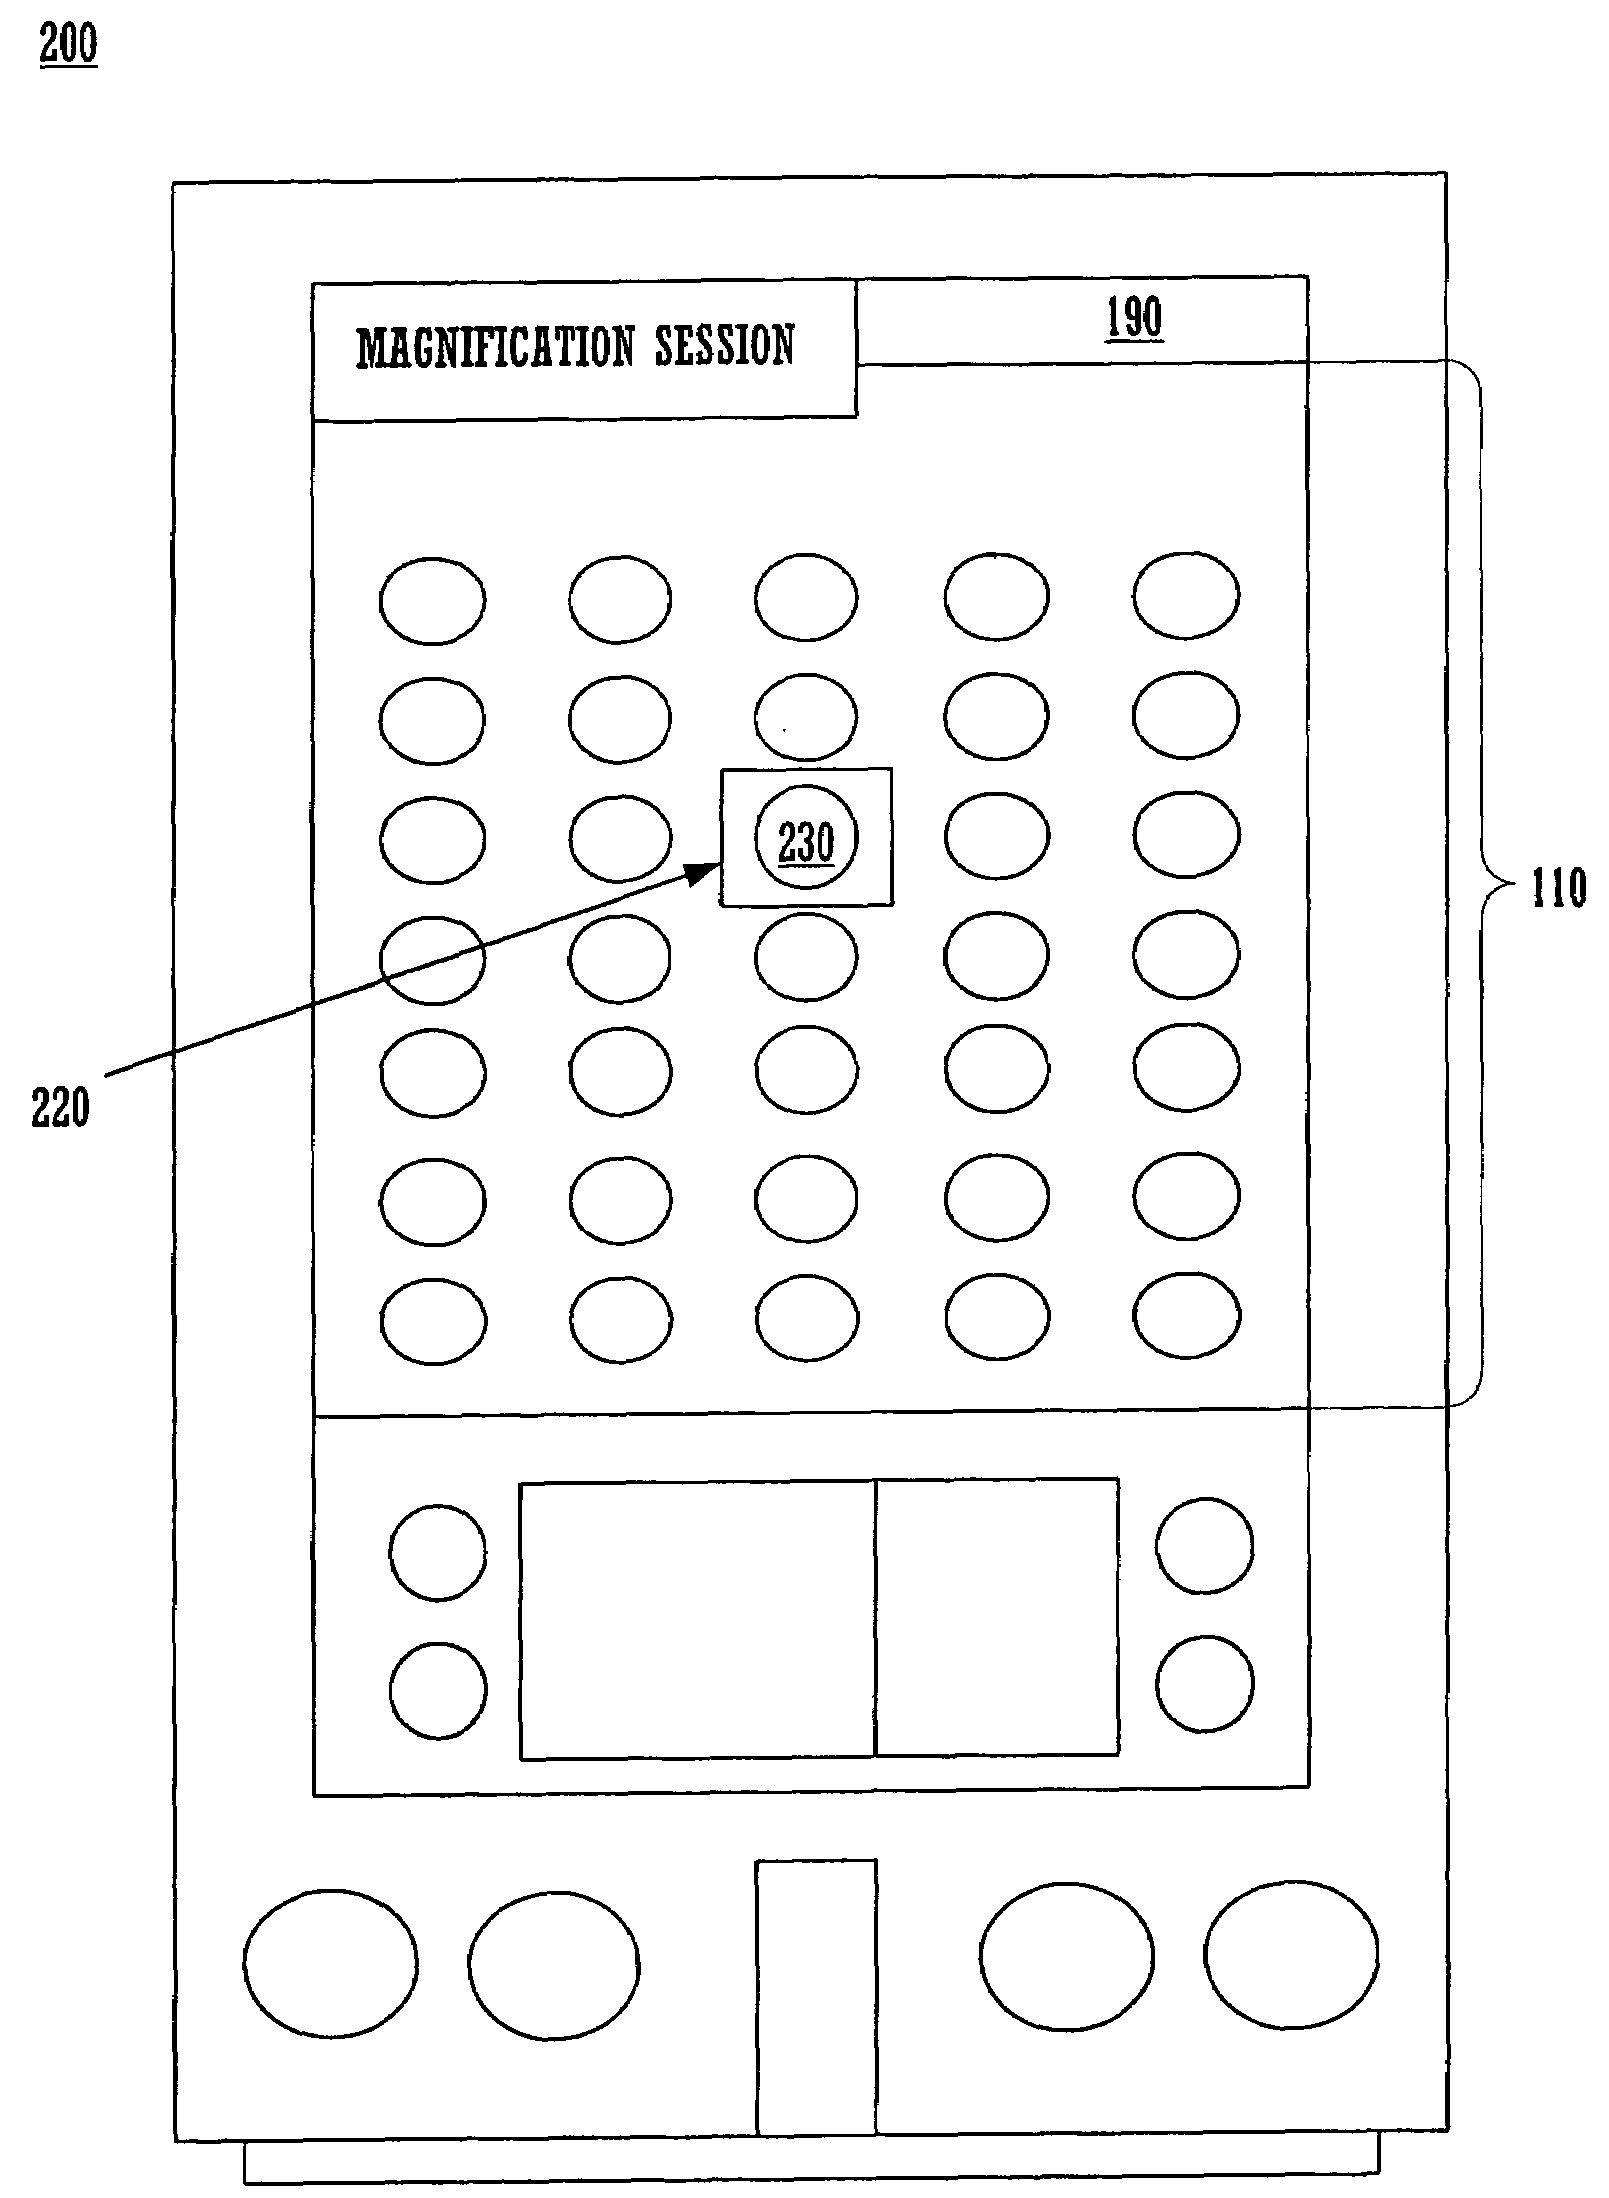 Method and system for navigating a display screen for locating a desired item of information